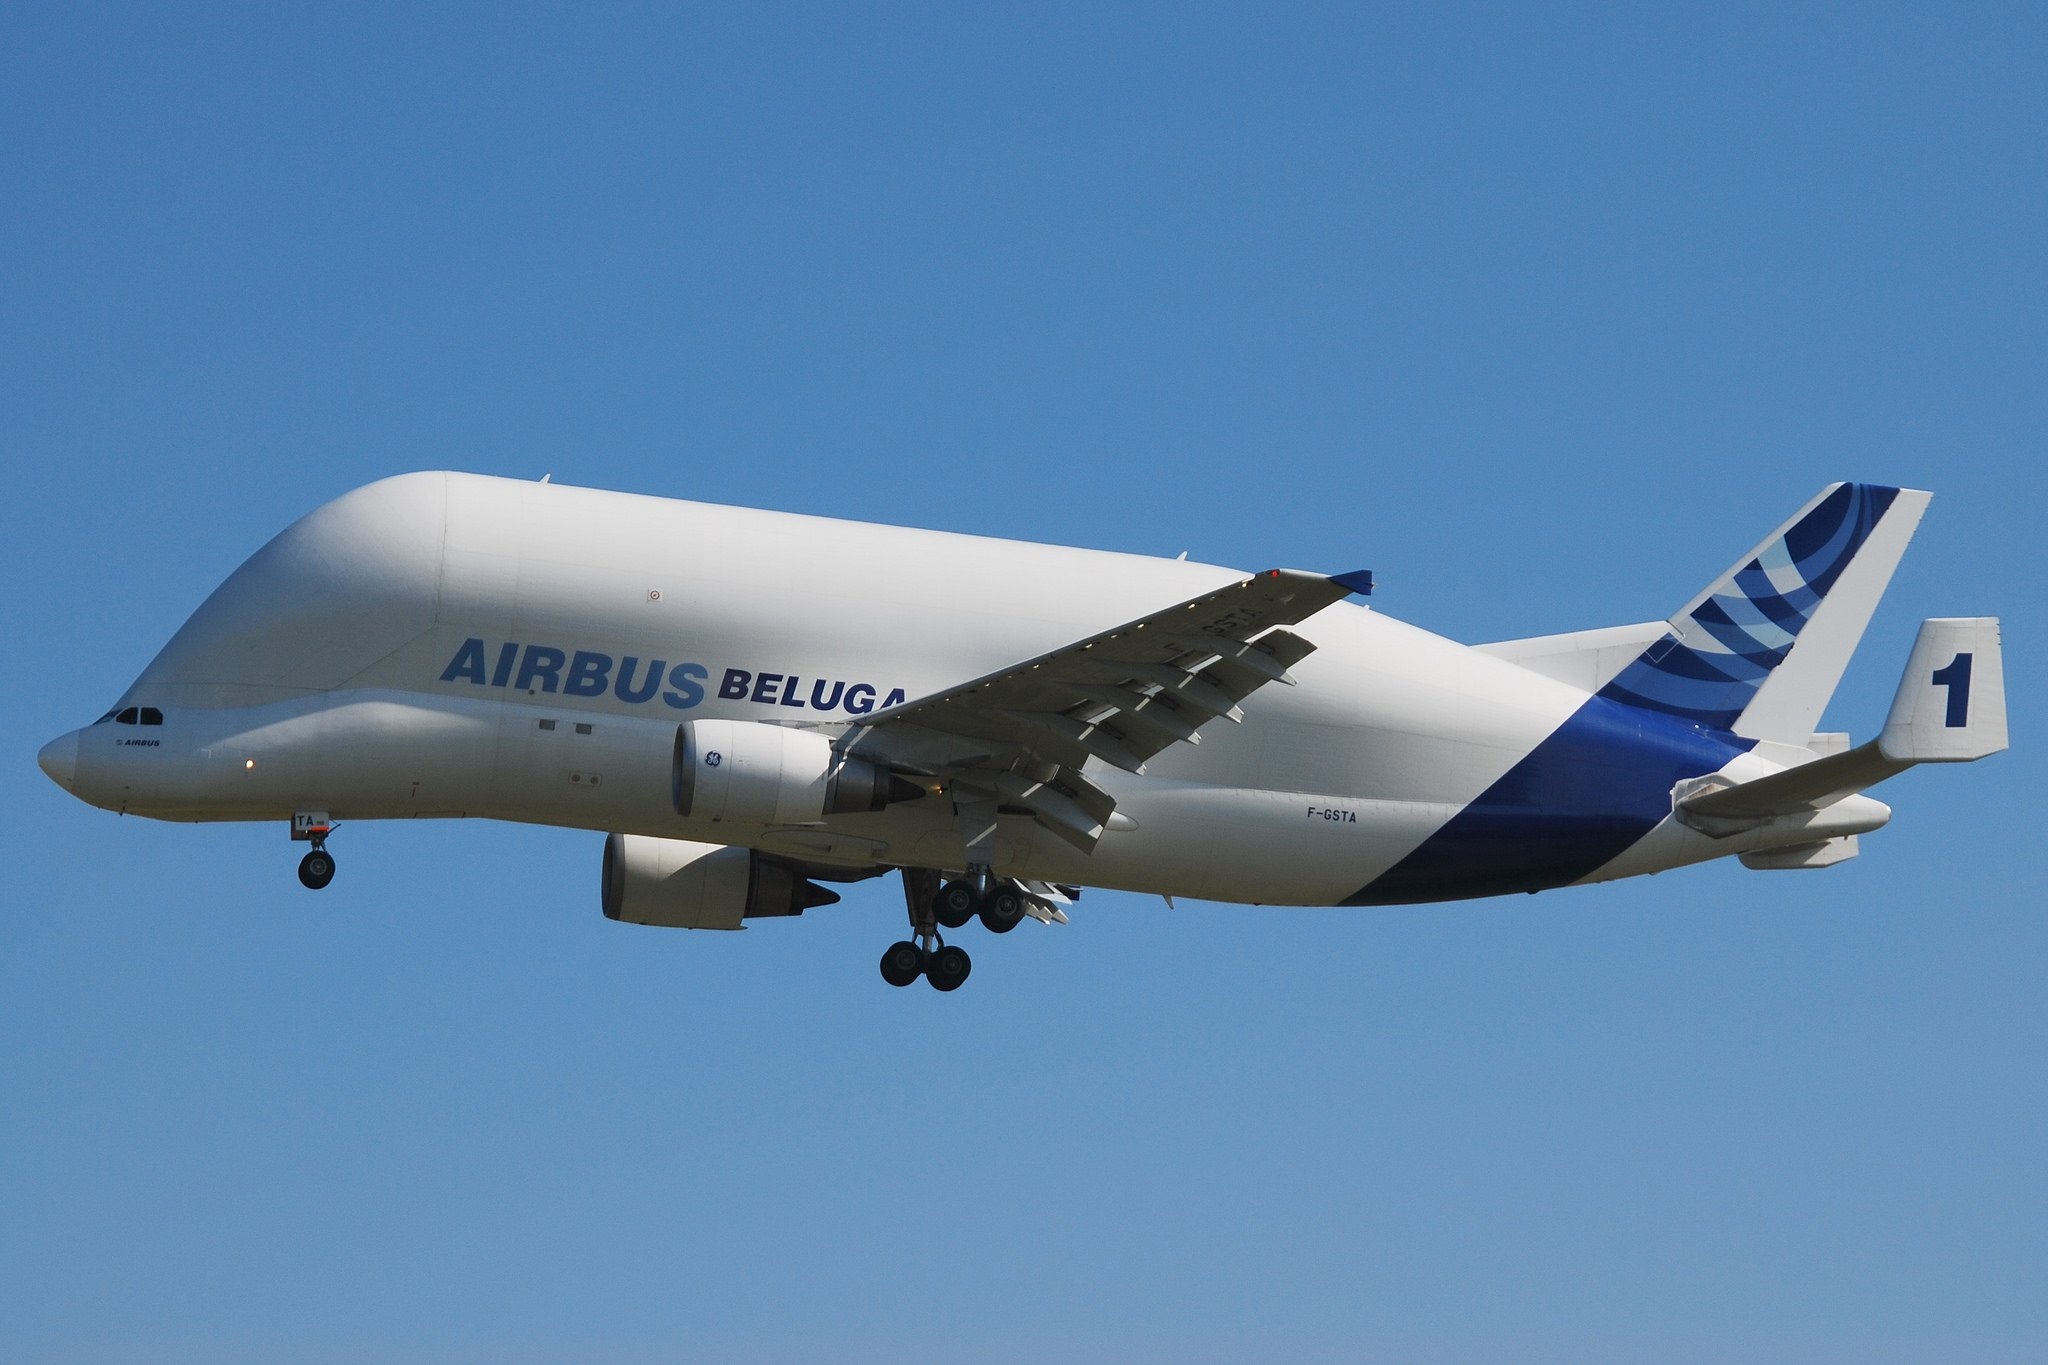 Airbus BELUGA A300 600ST Cargo aircrafts airliner airplane plane transport sky wallpaper | | 490237 2050x1370